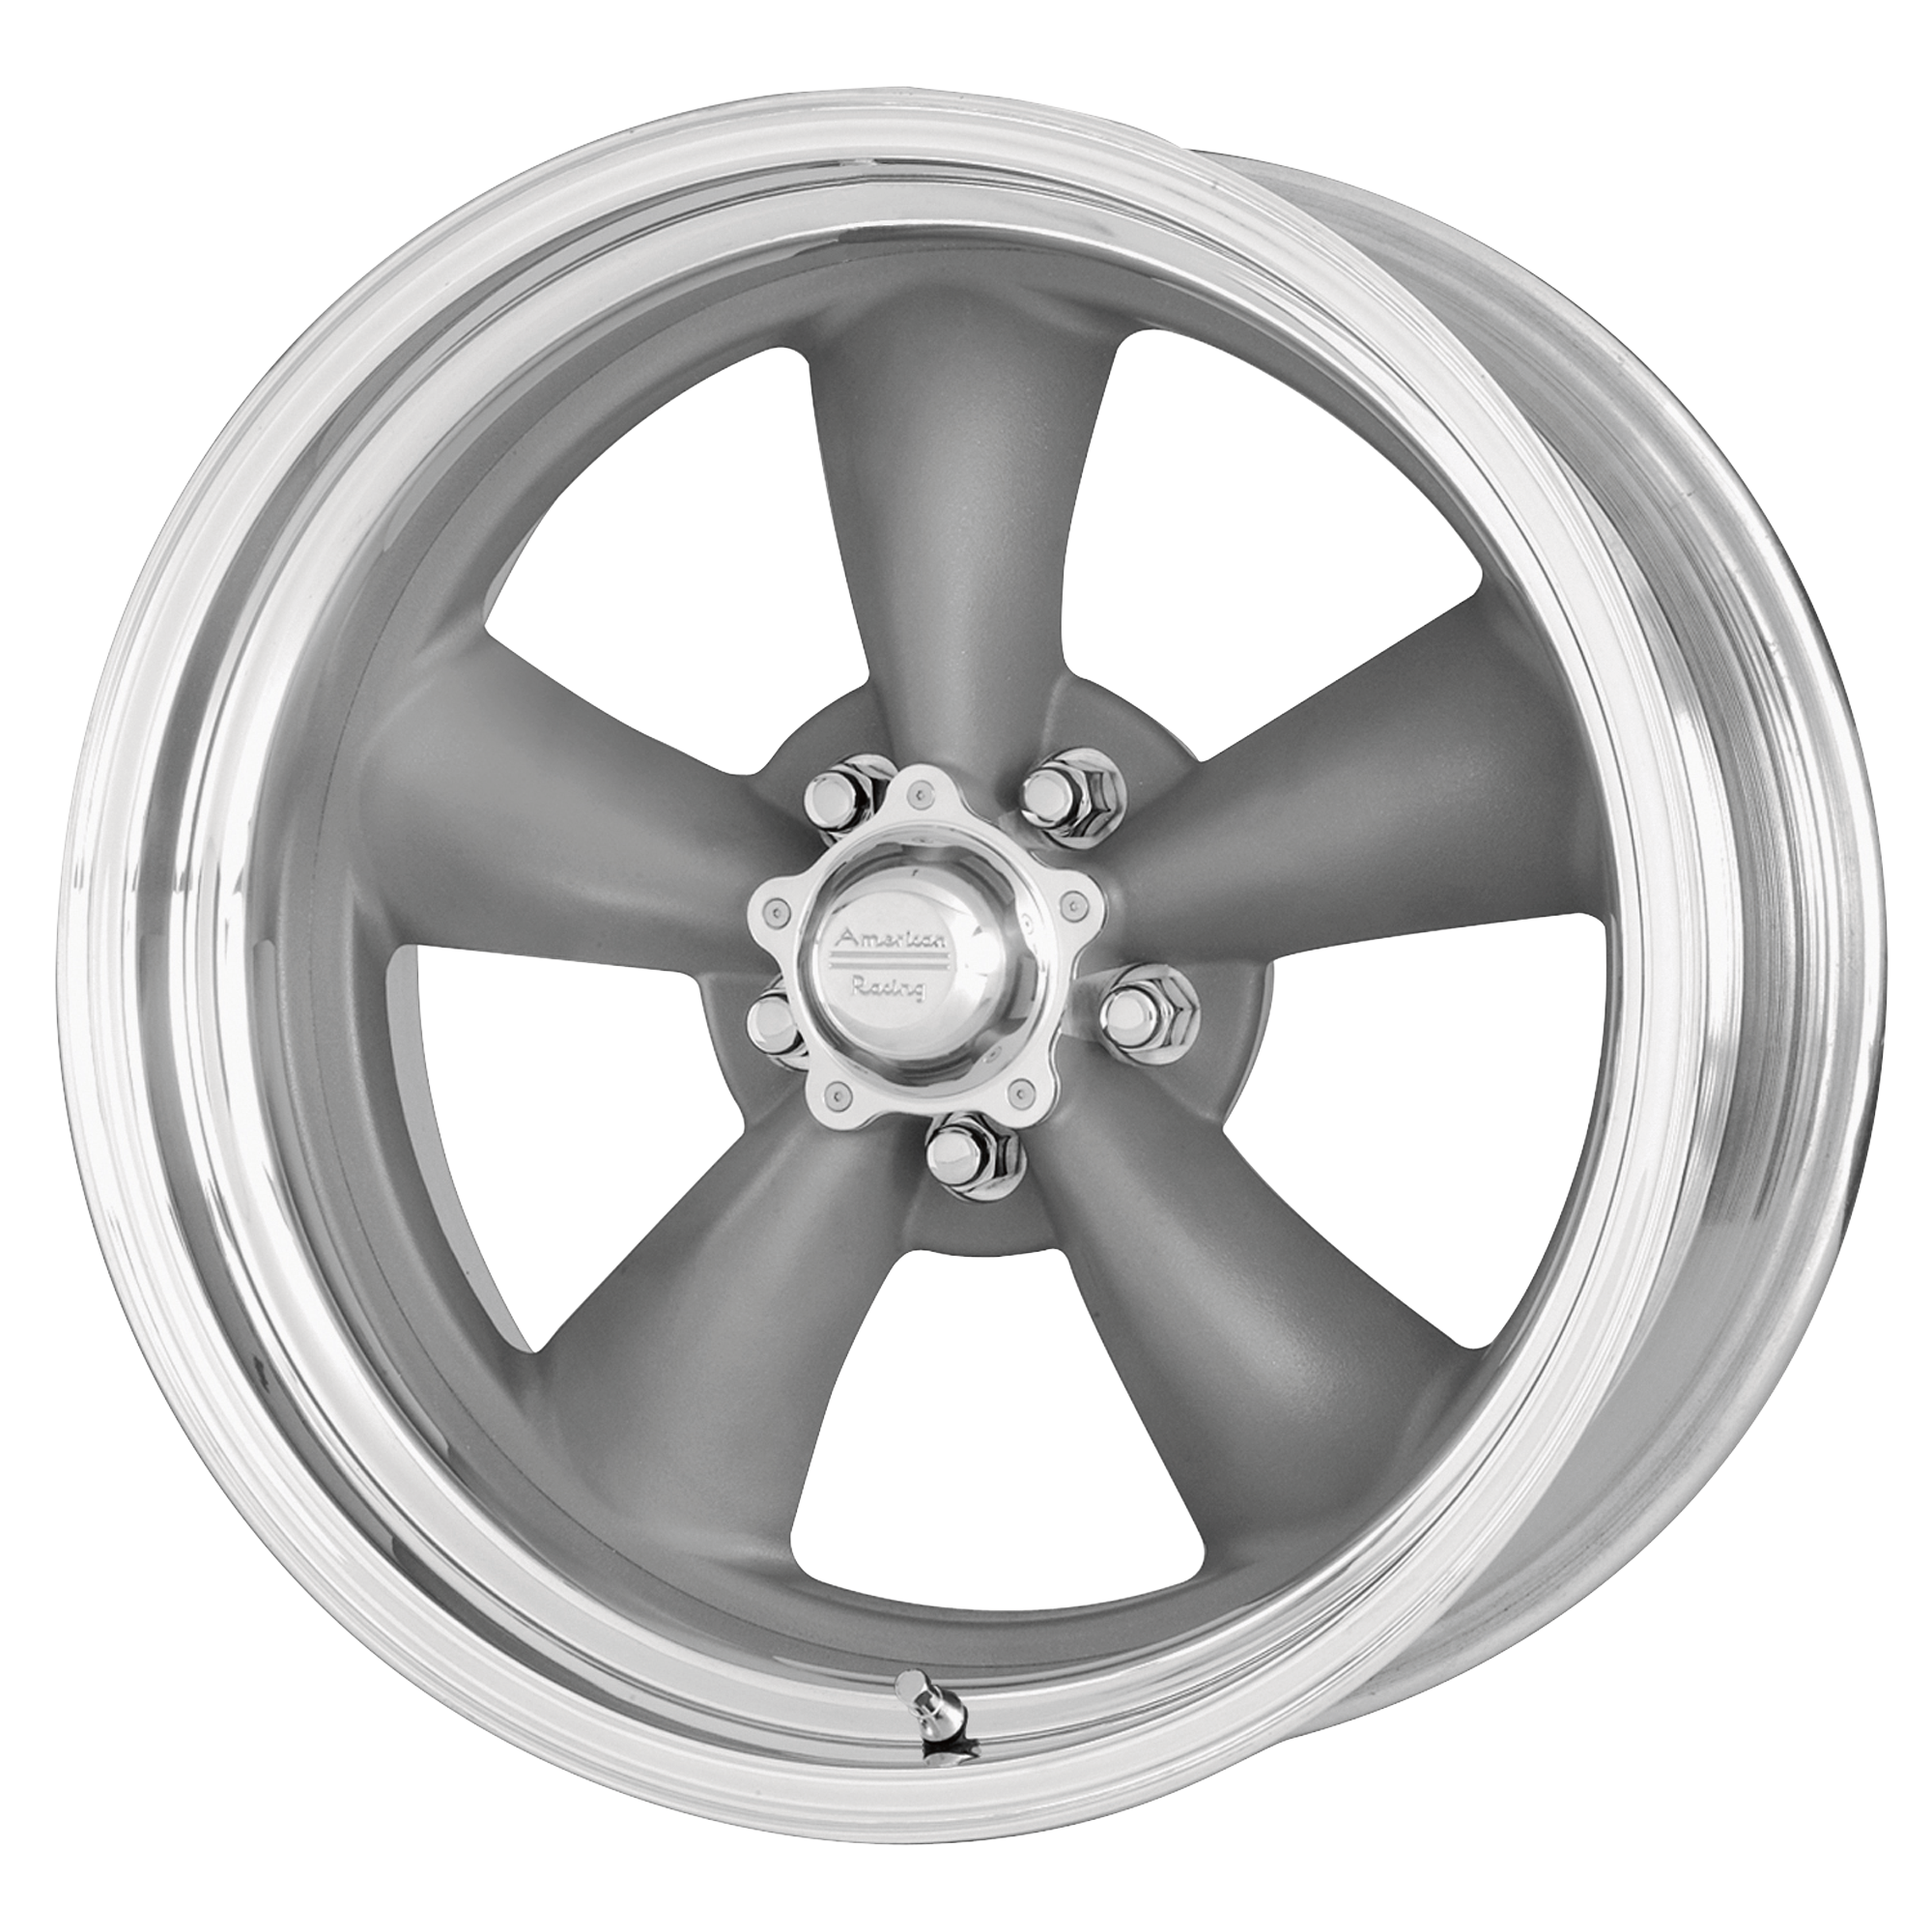 CLASSIC TORQ THRUST II ONE PIECE 20x10 5x139.70 MAG GRAY W/ MACHINED LIP (6 mm) - Tires and Engine Performance